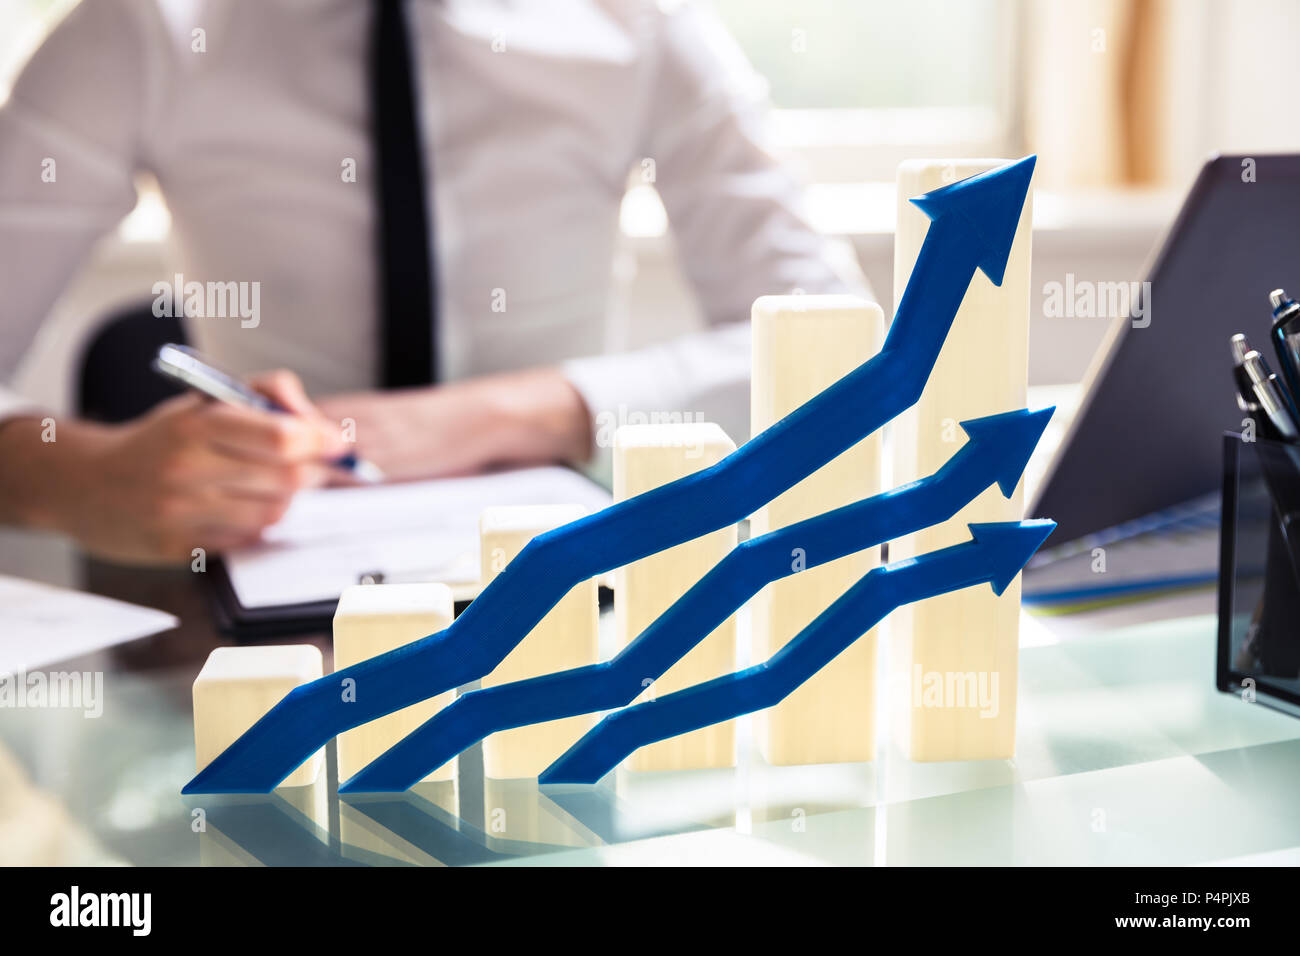 Close-up Of Blue Arrows In Front Of Graph Showing Upward Direction On Desk Stock Photo